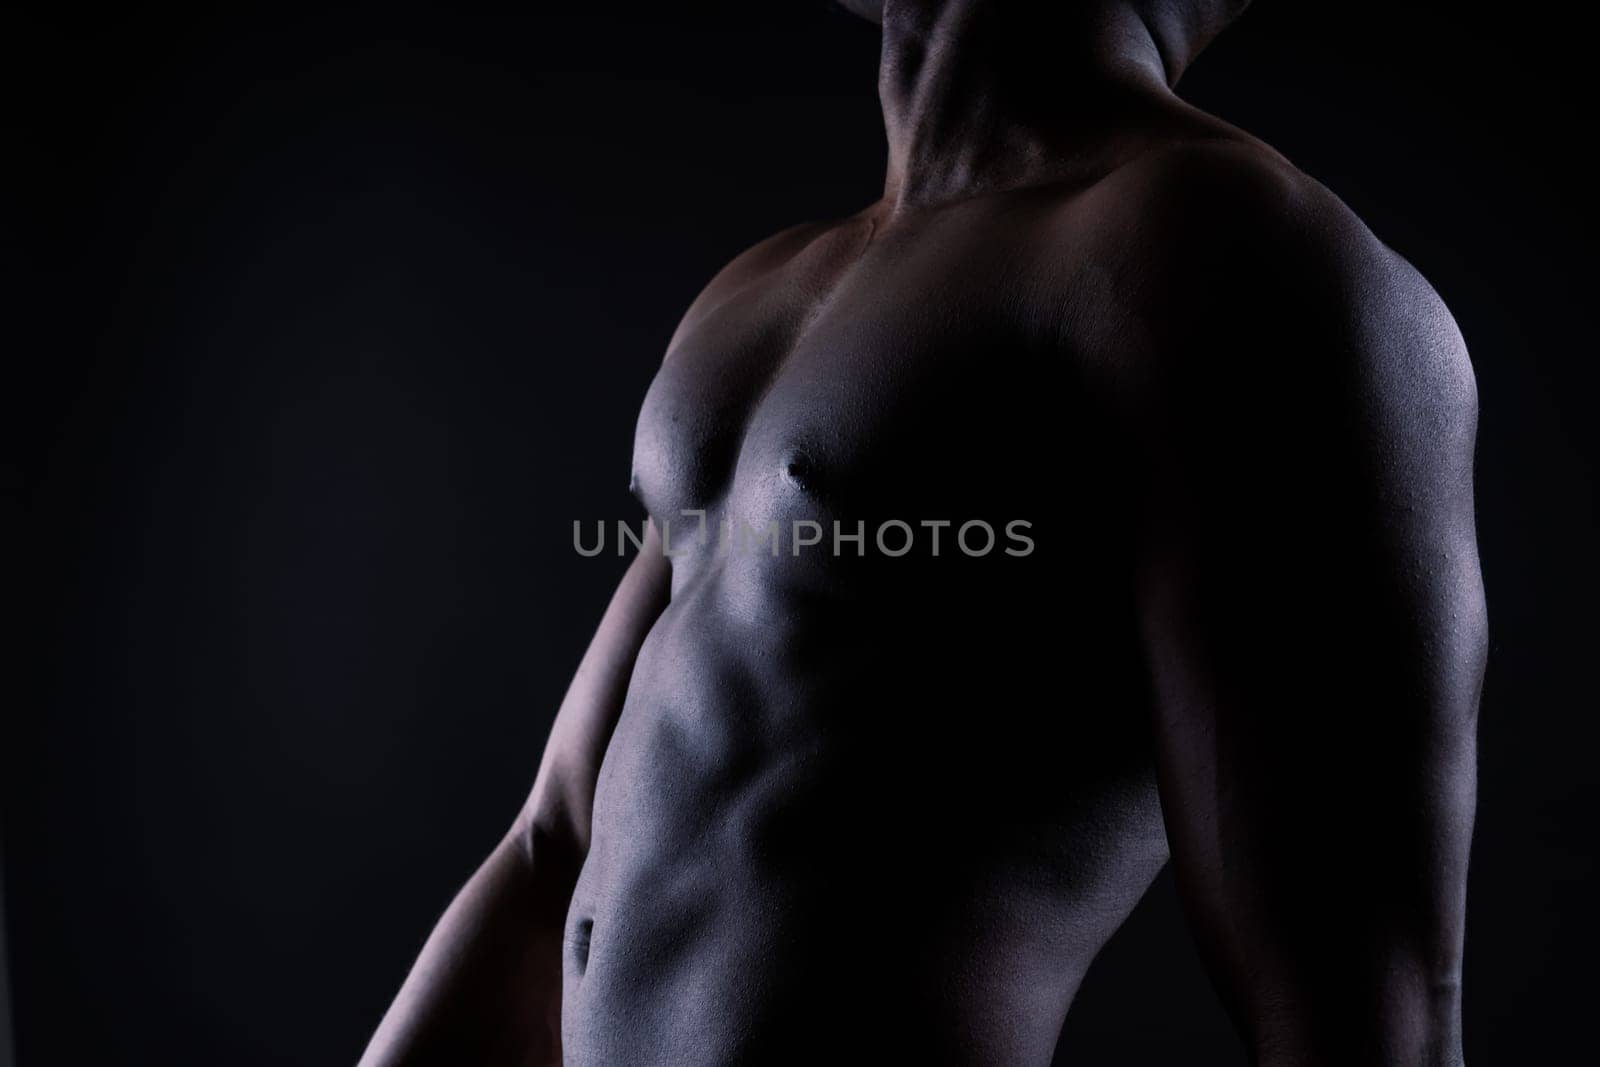 Athletic african american man topless, big muscles, a dark background studio